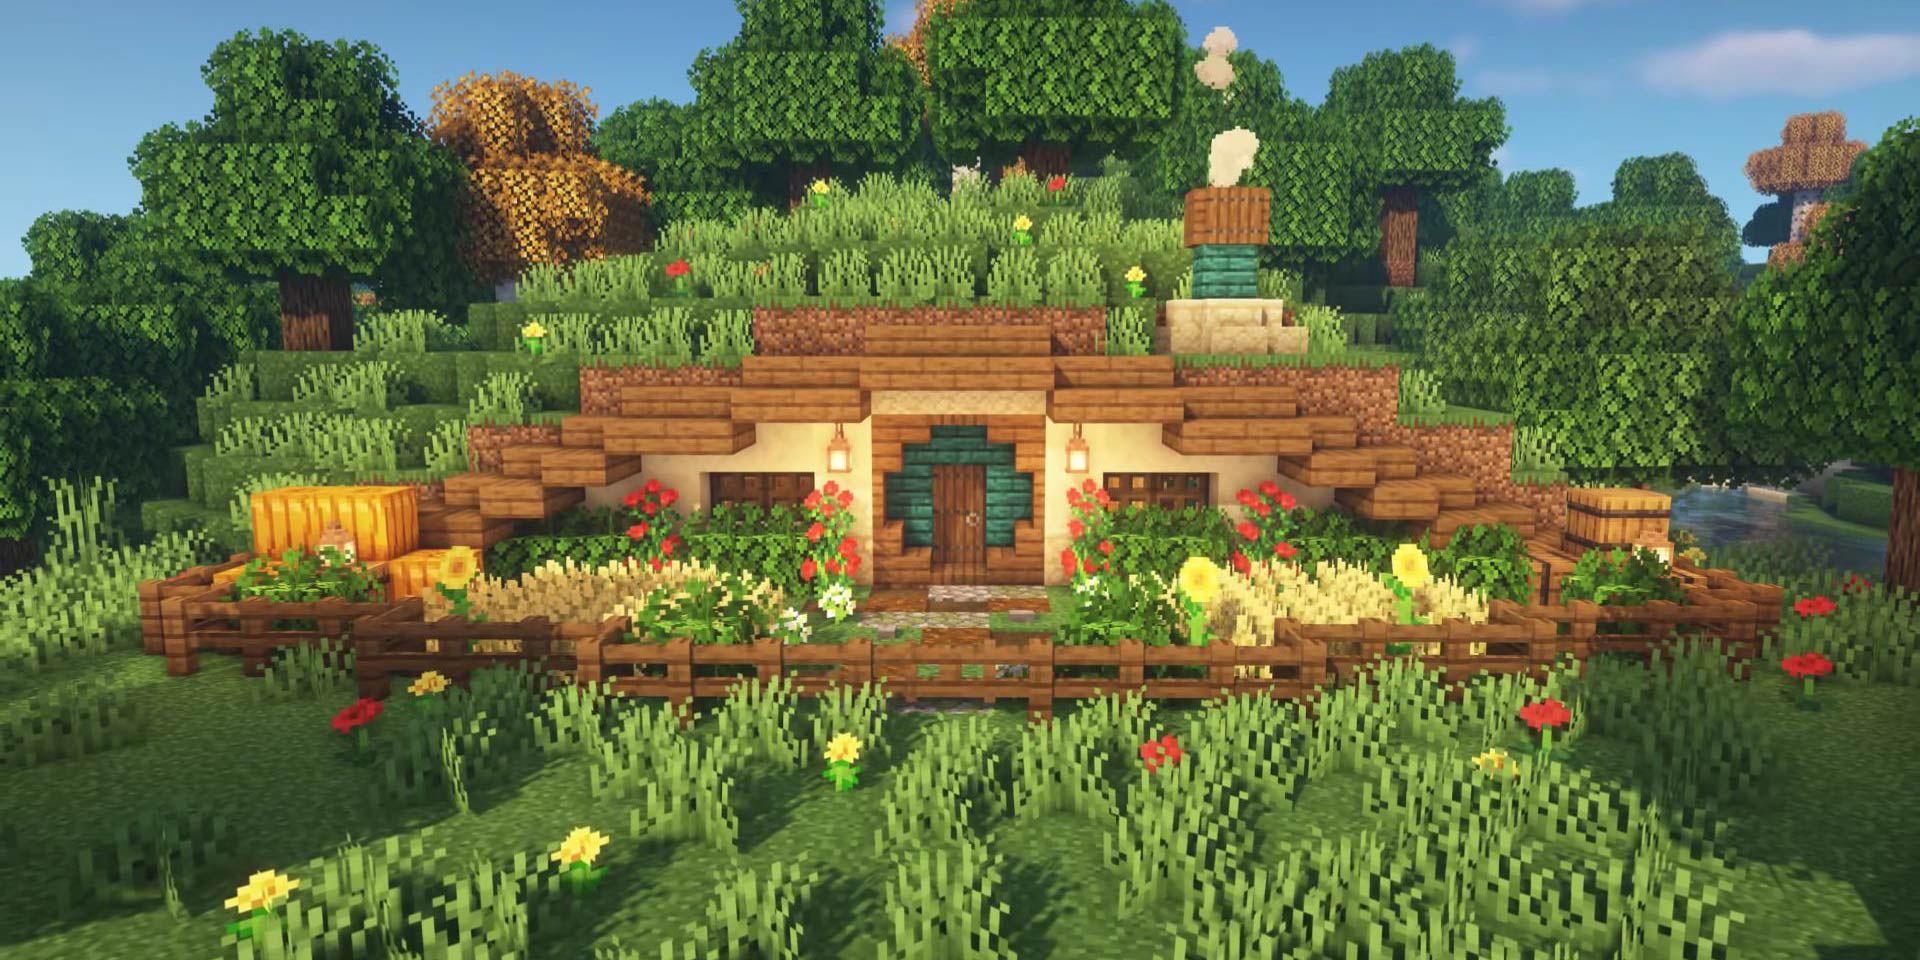 A cozy hobbit house built into the side of a hill in Minecraft.